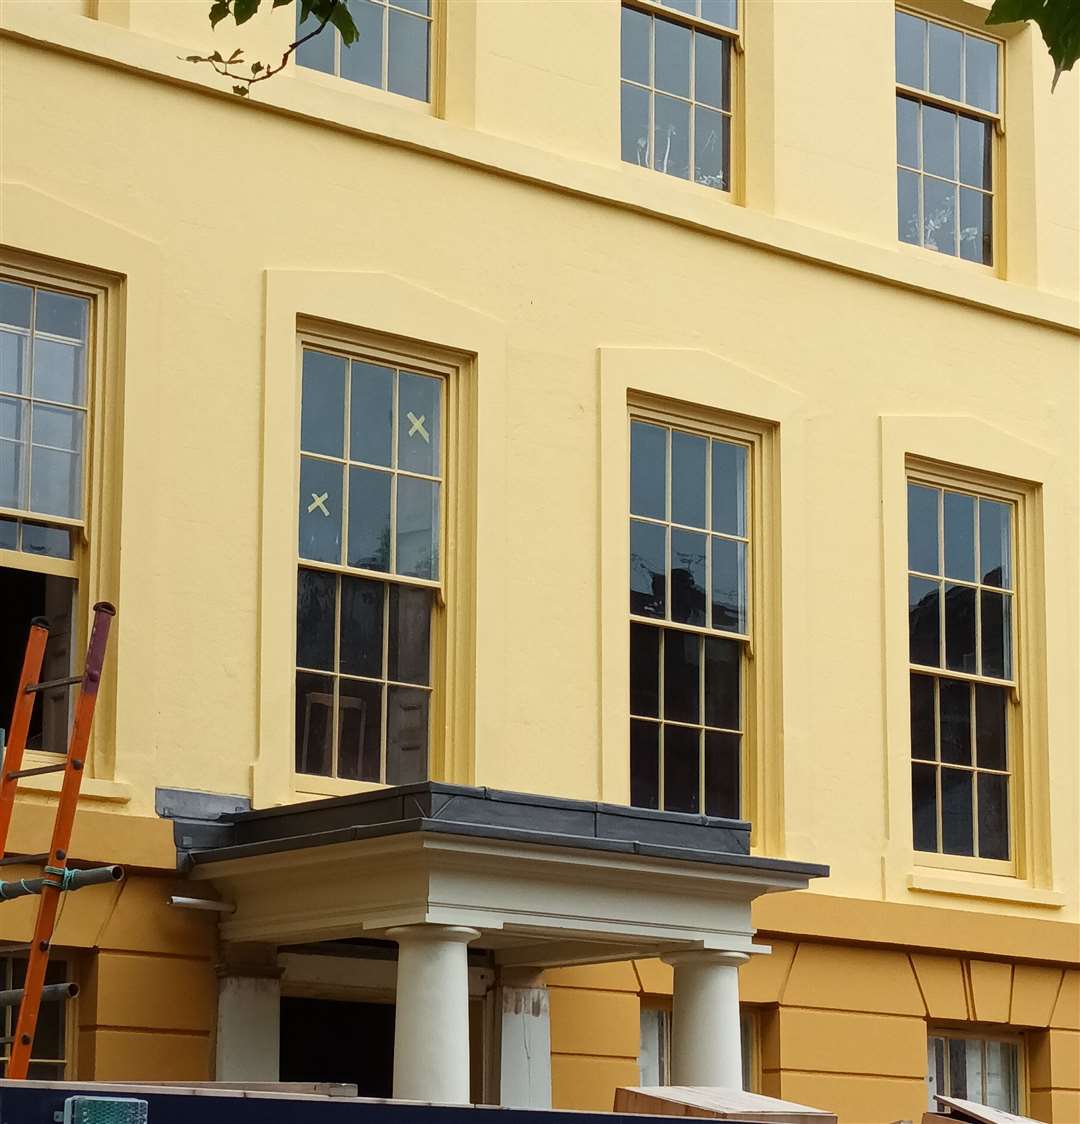 The building had its old porch reinstated and the front painted yellow. Photo: Sheila Featherstone